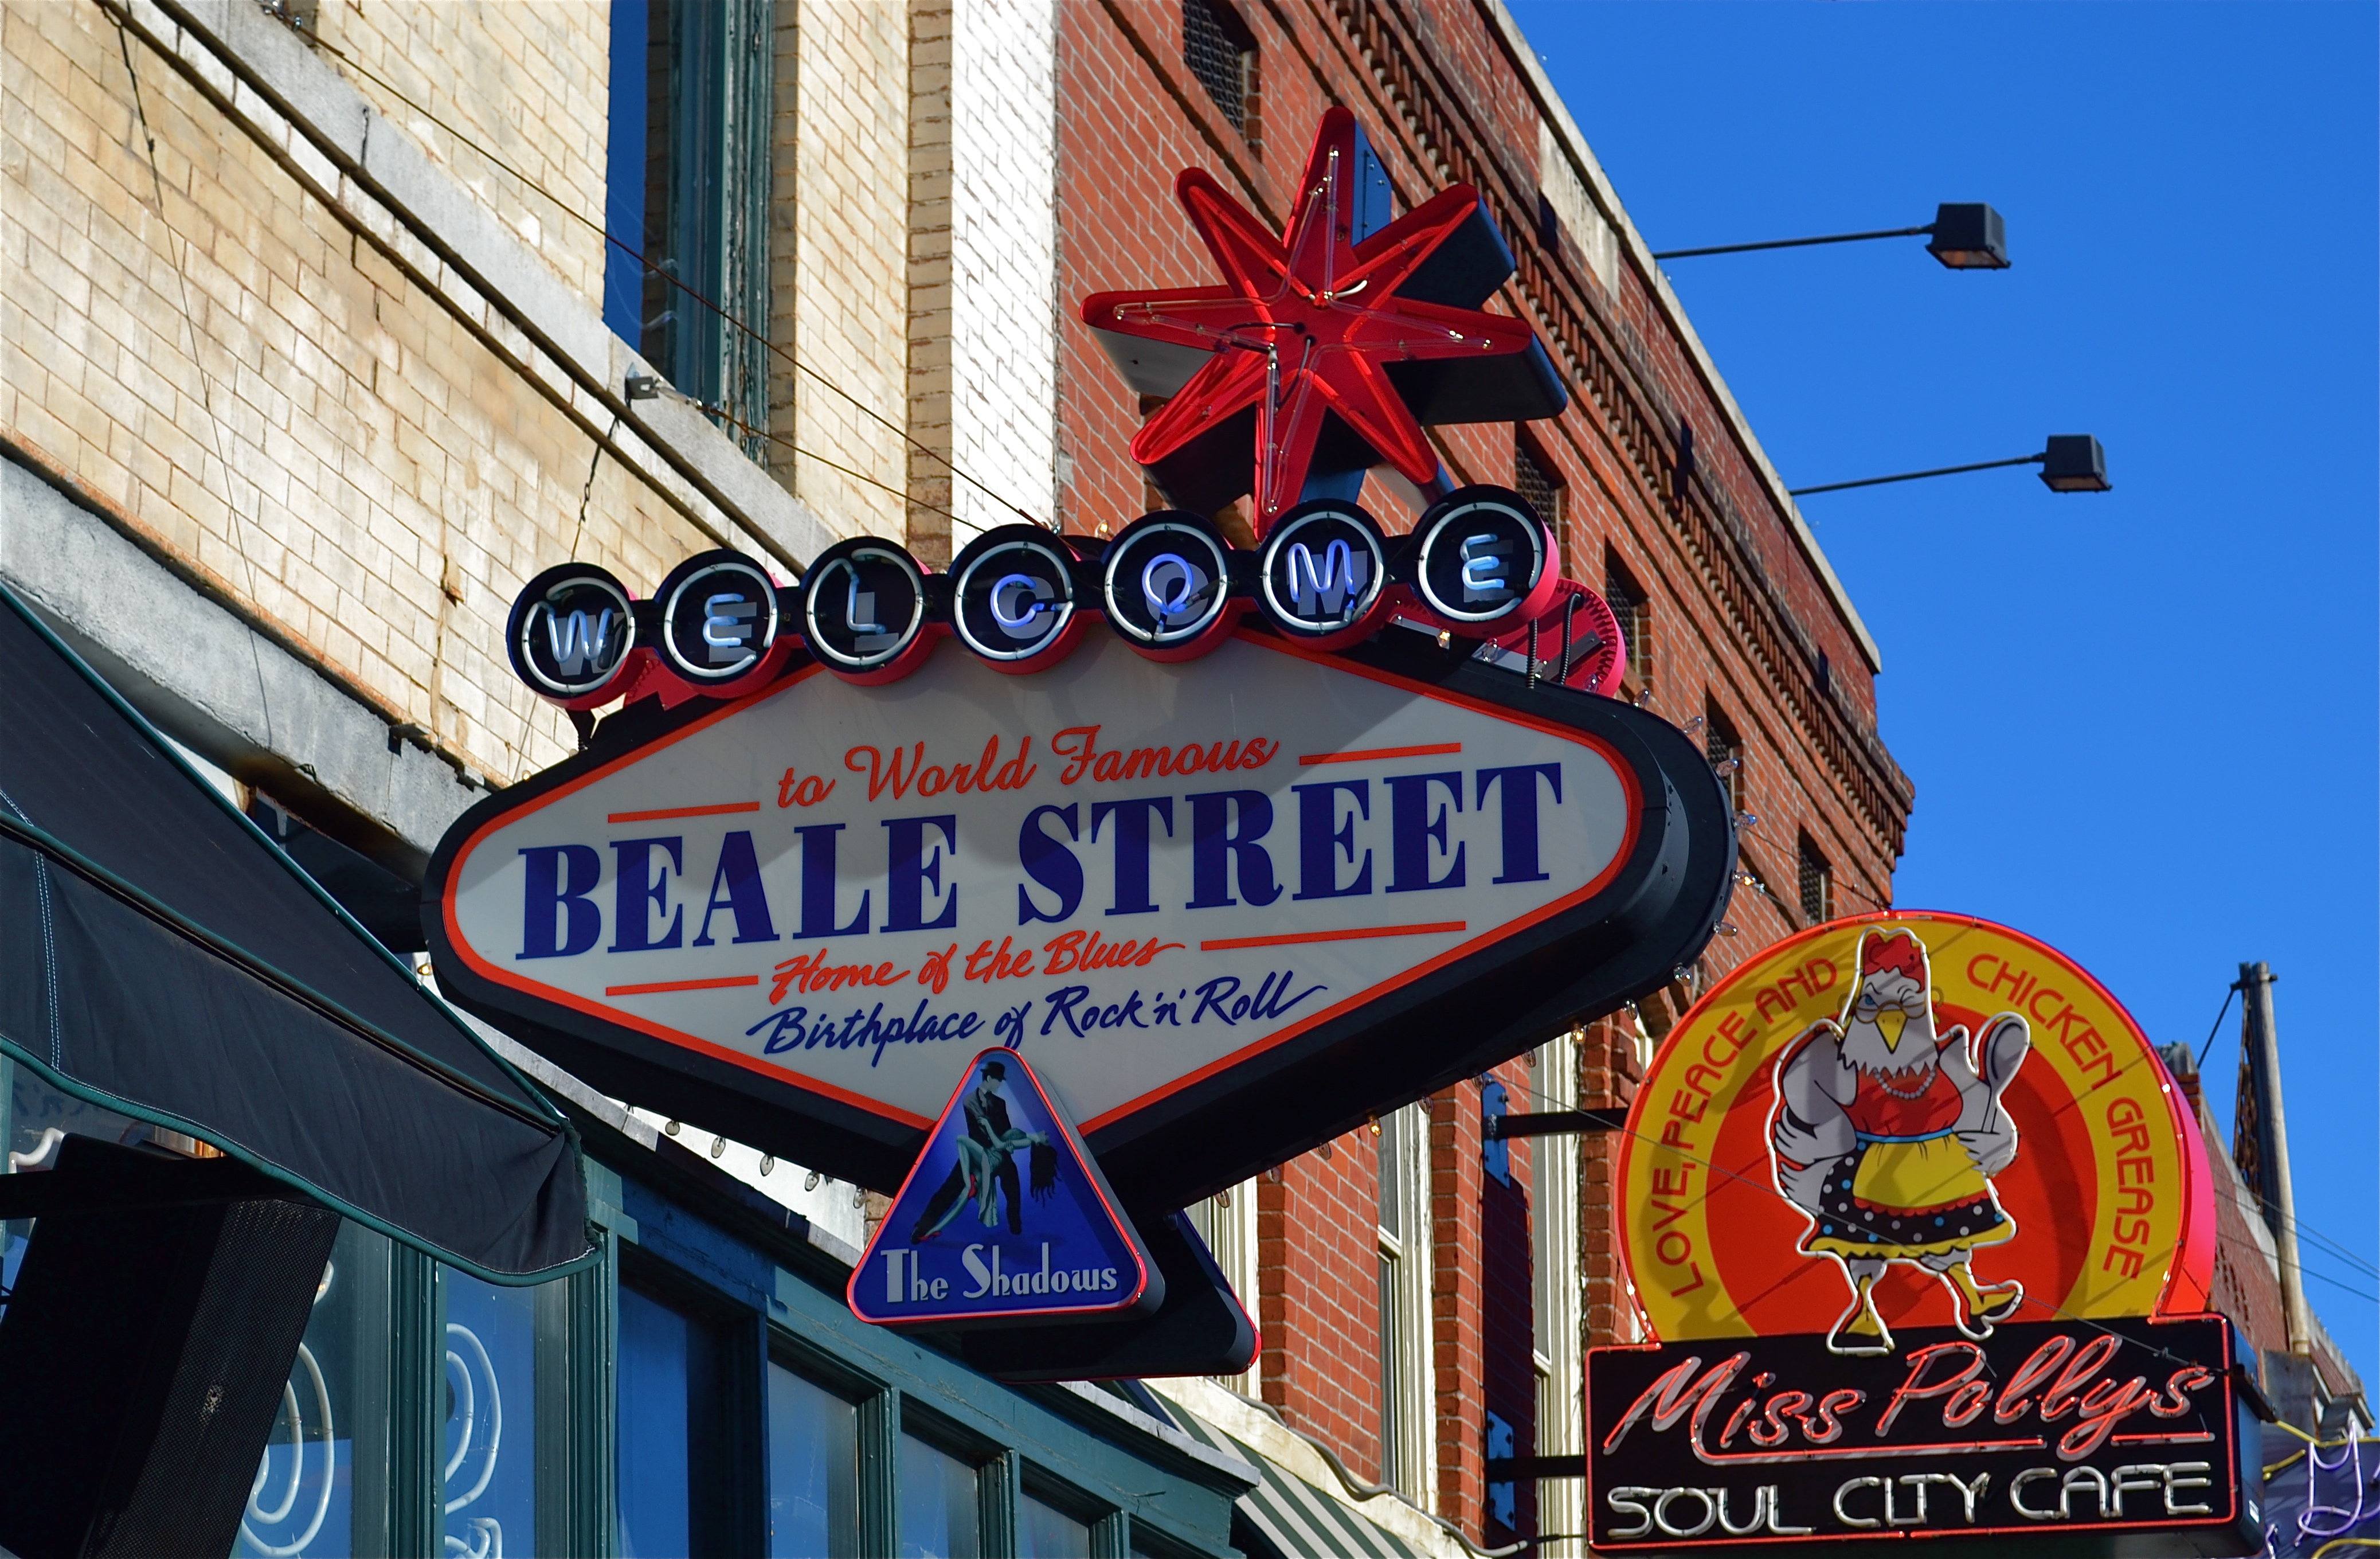 You can't miss Beale Street!